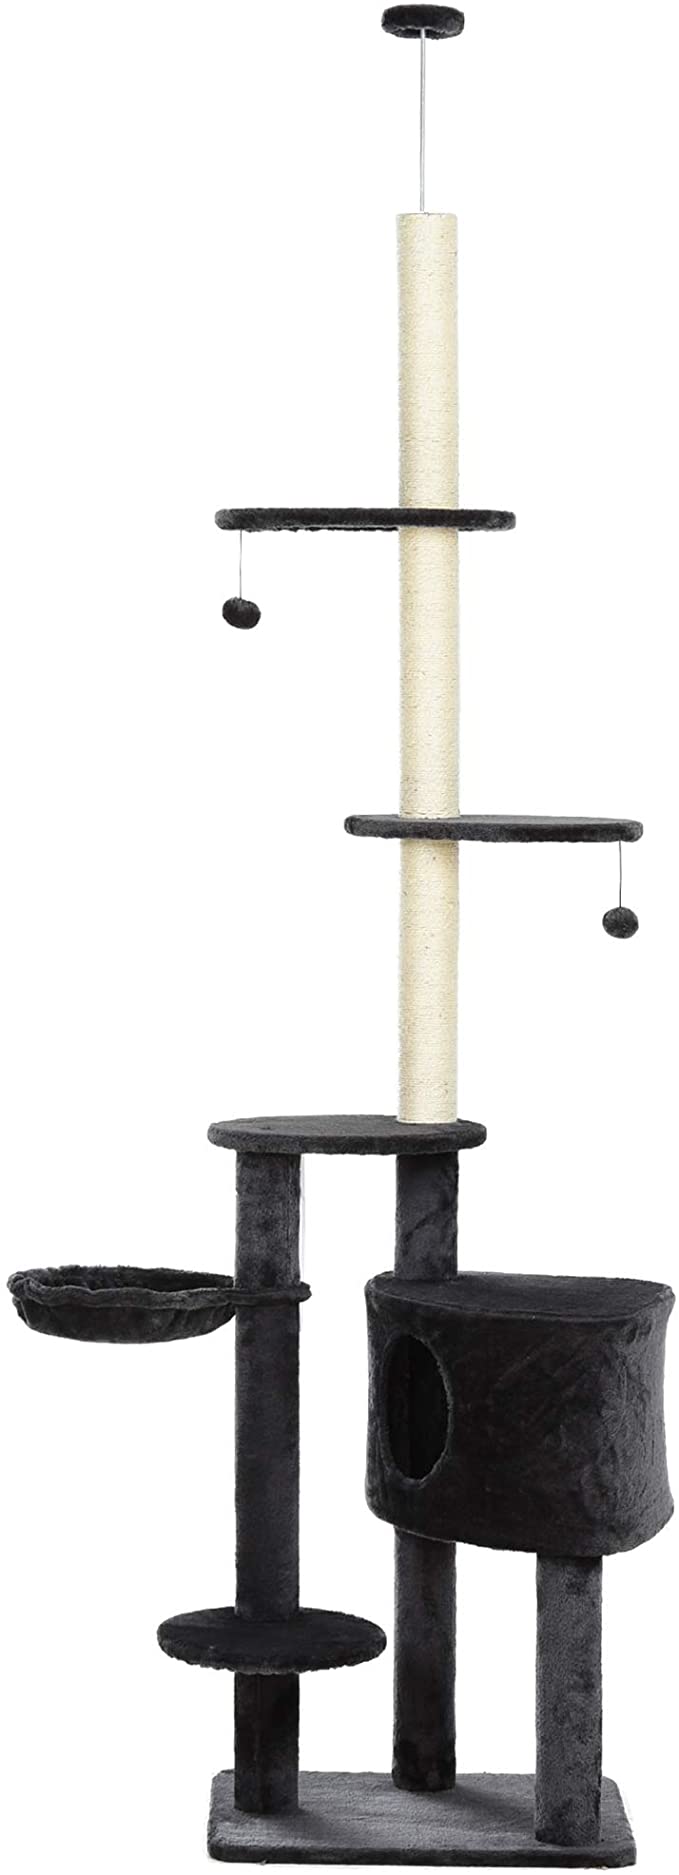 PawHut Adjustable Height Floor-to-Ceiling Vertical Cat Tree with Carpet Platforms, Condo & Rope Scratching Areas, Dark Grey